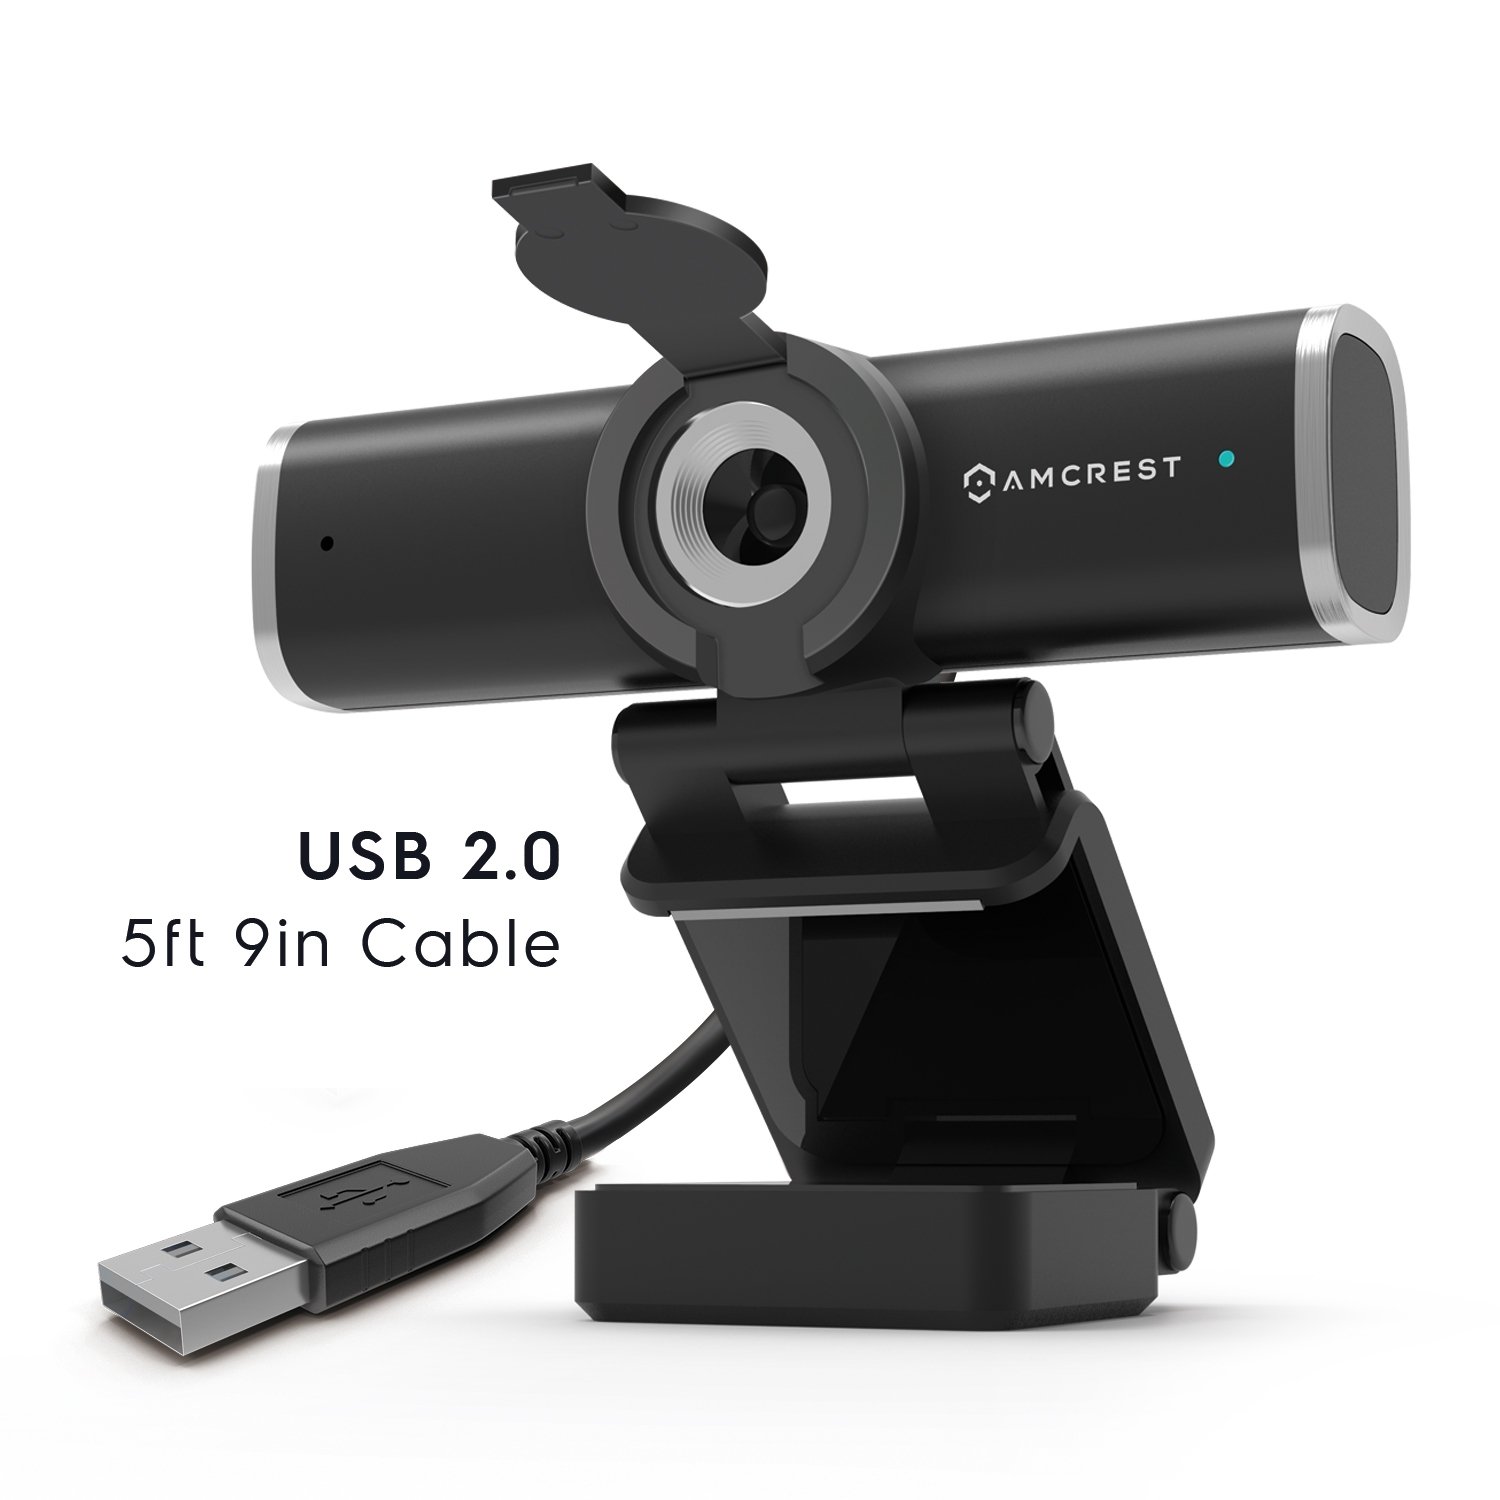 Webcam with Microphone,1080P Webcam USB Web Camera for Desktop & Computer,HD Web Cam Video Camera with Privacy Cover & Tripod,Laptop Desktop PC Camera for Video Conference Recording Streaming Black 